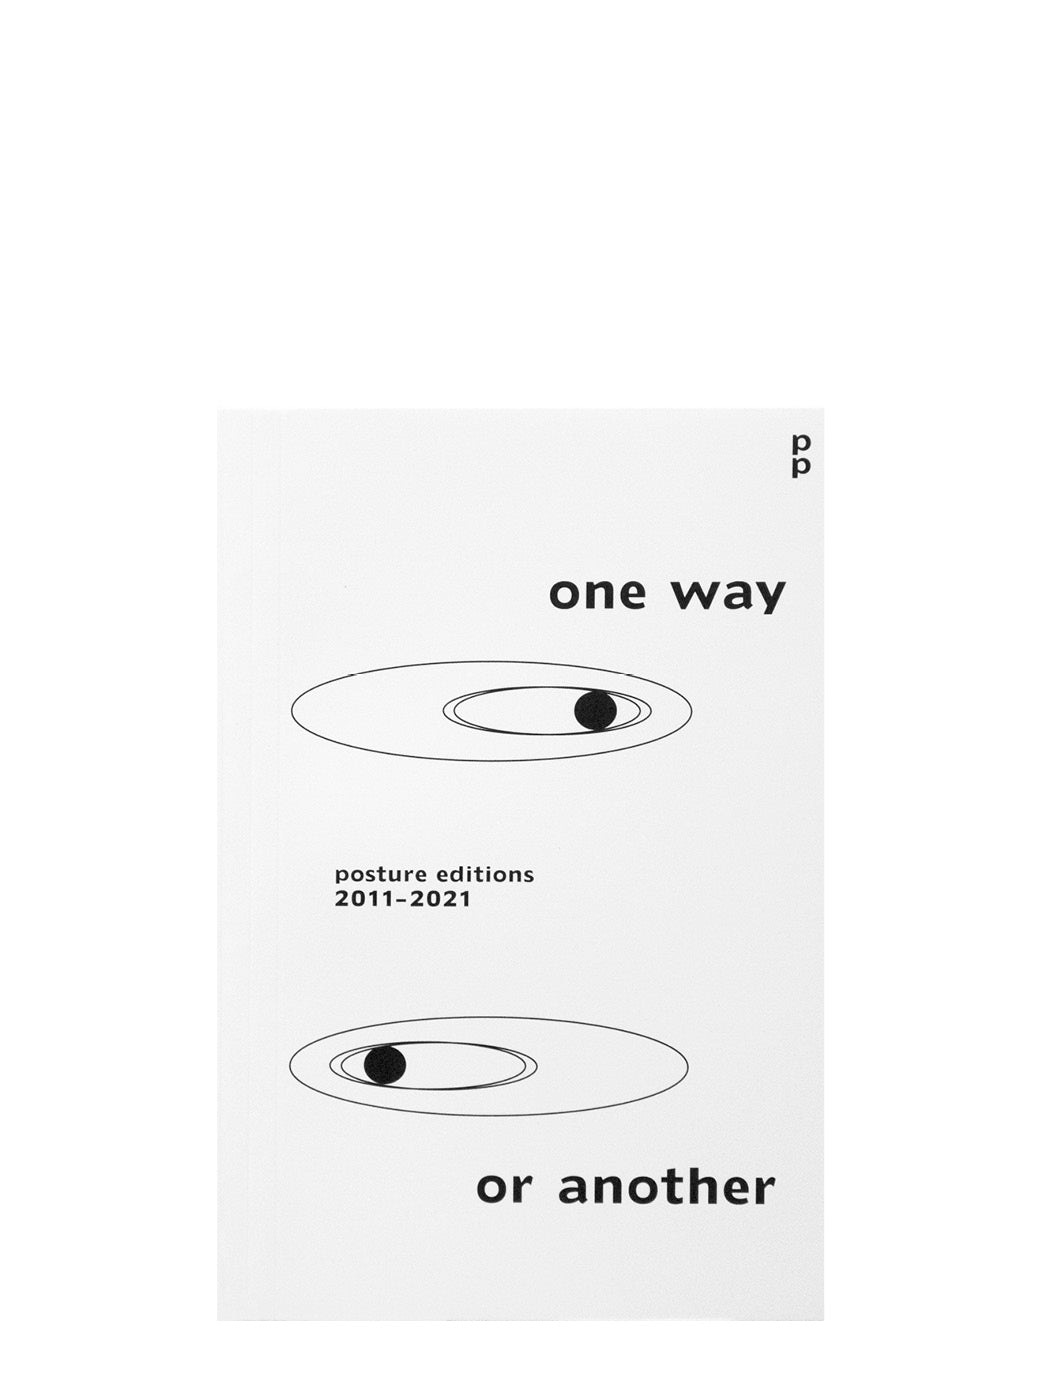 Posture Editions ‘One way or another’